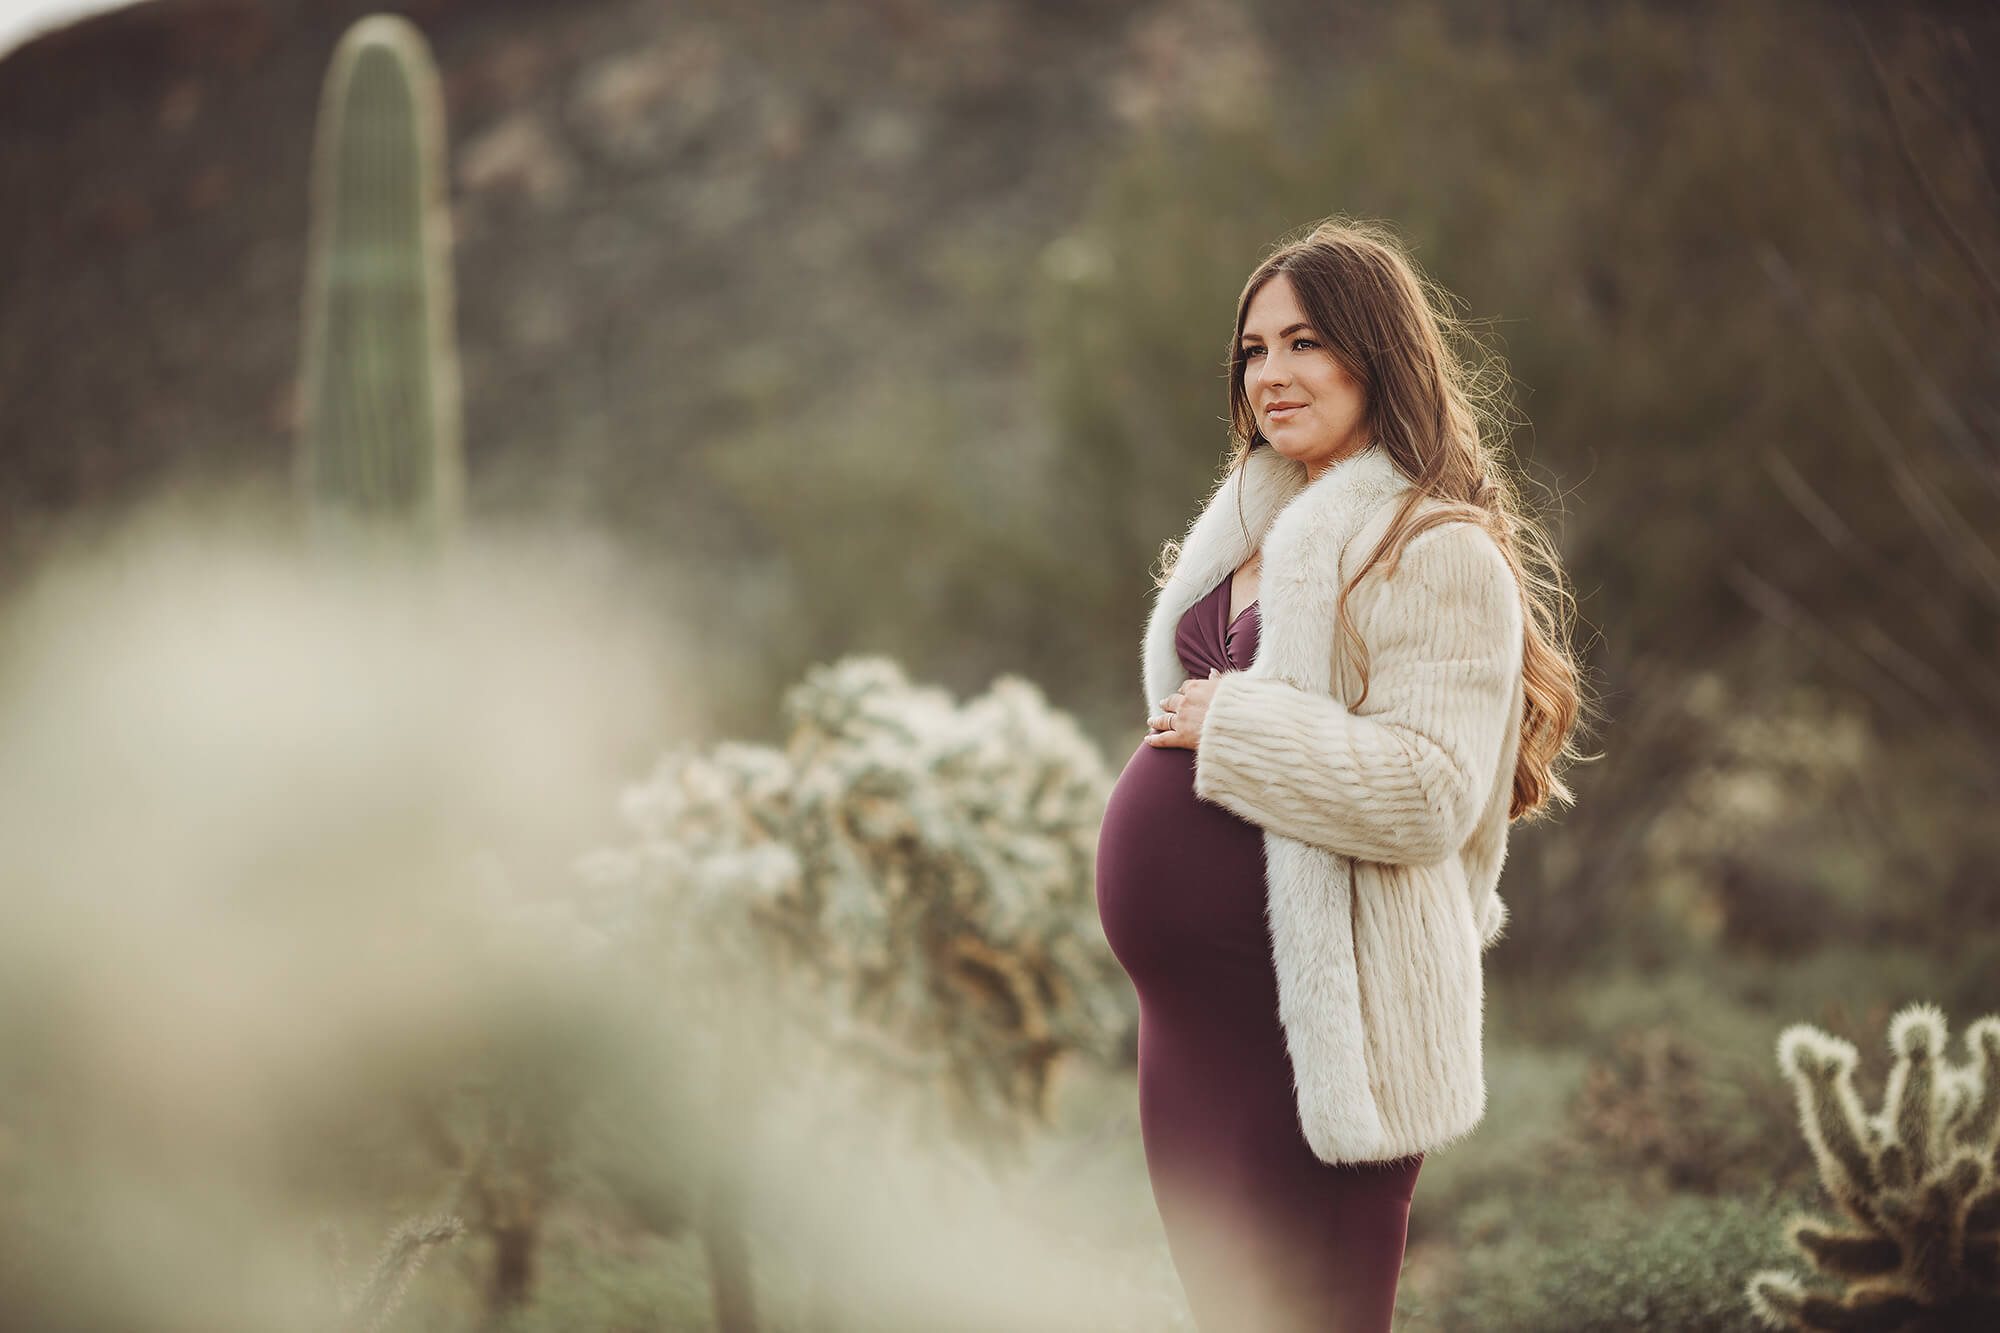 Using the glow of jumping cholla quills to frame Anica during her desert maternity session near Tucson